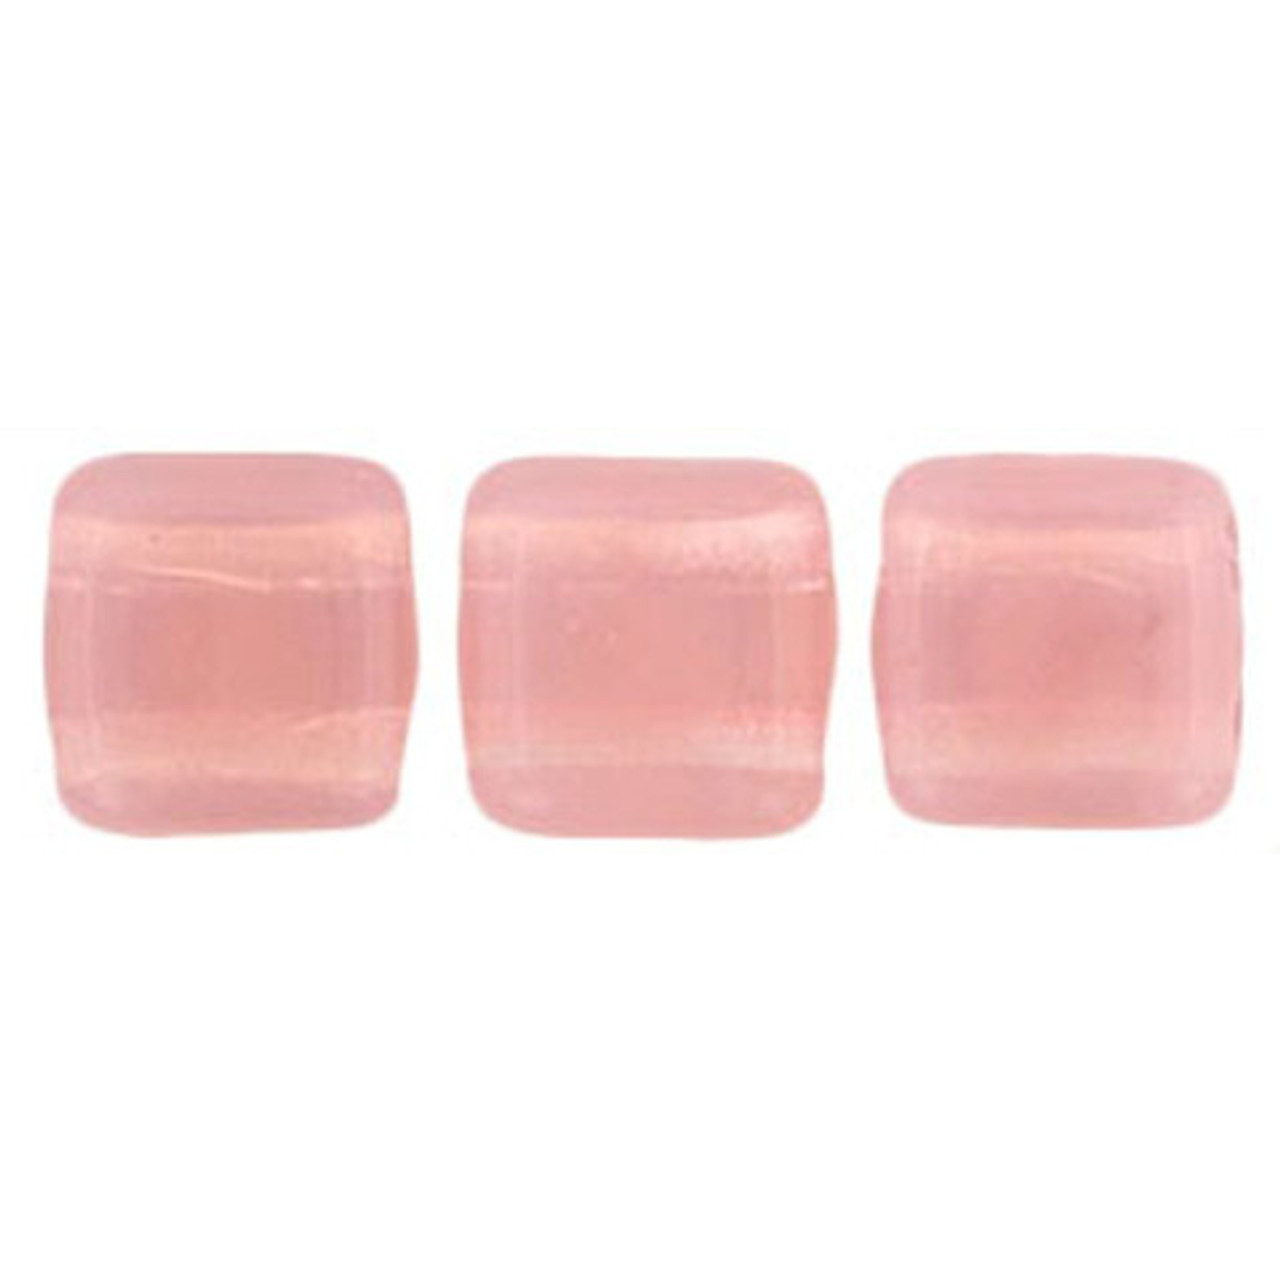 50 CzechMates 6mm Two Hole Tile Beads Milky Turquoise Pink Topaz Luste